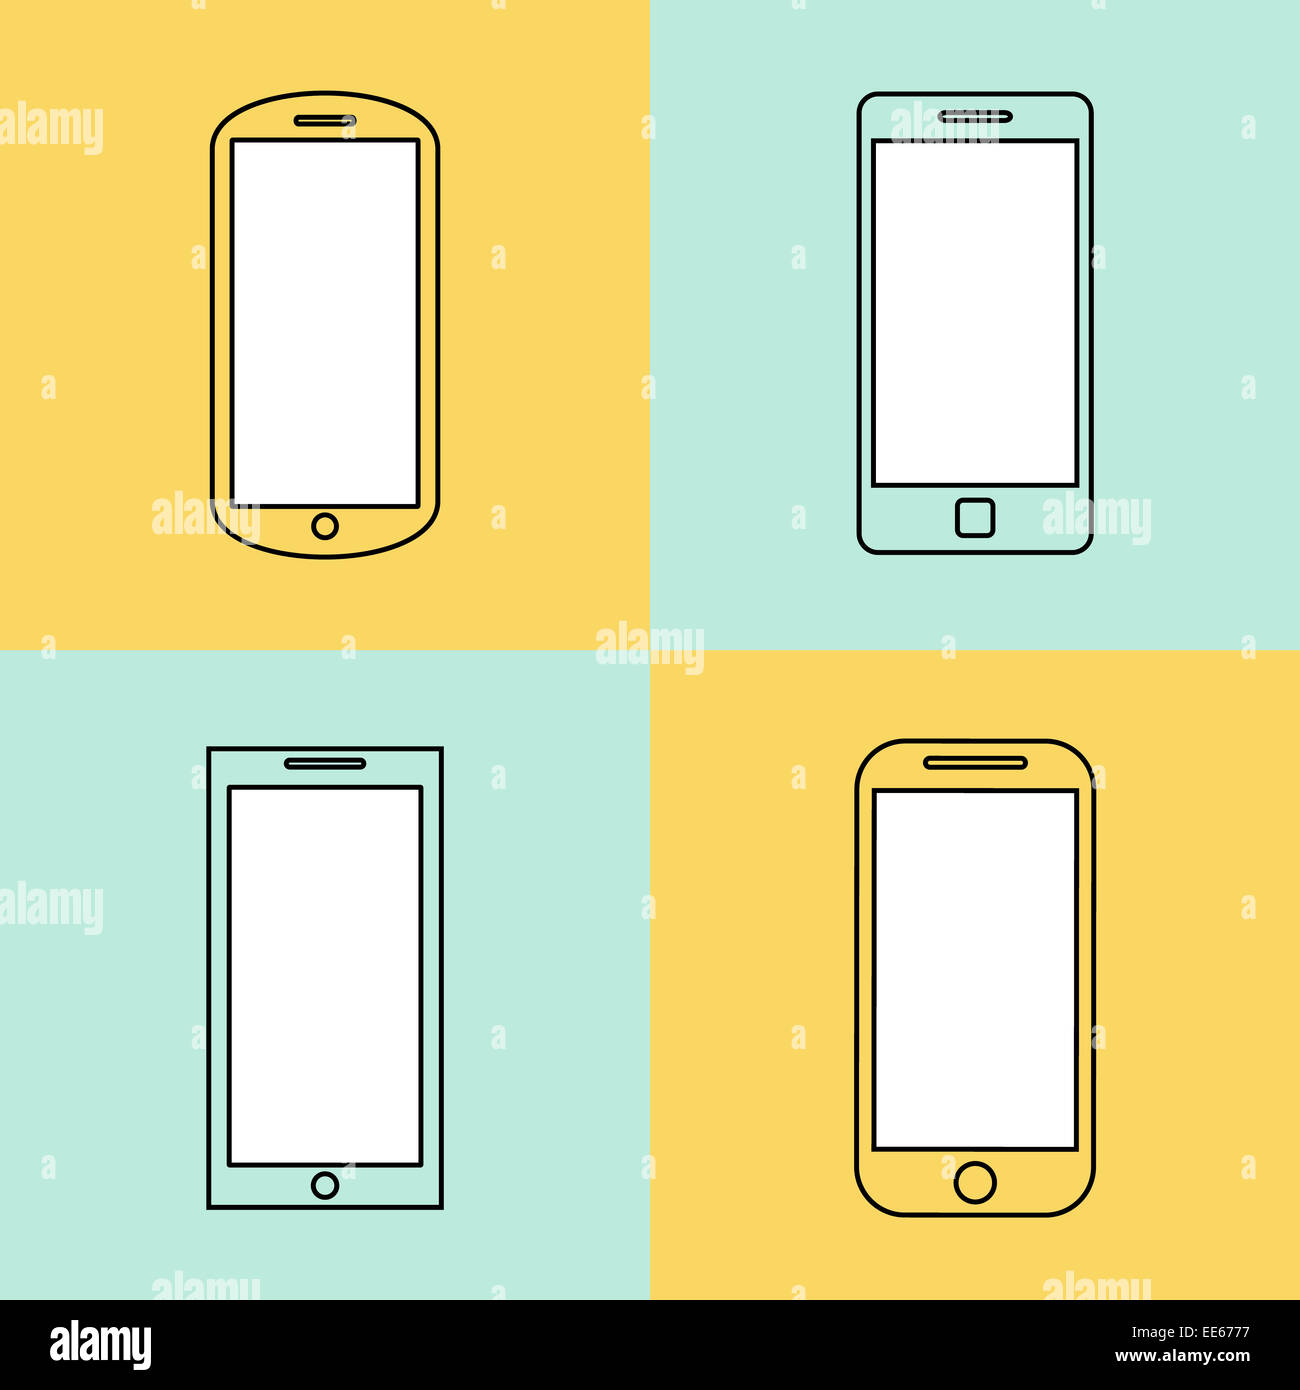 Mobile phone icons set. Smartphone design template elements for web and mobile applications. Stroke thin line flat minimalistic style. Vector illustration eps10 Stock Photo